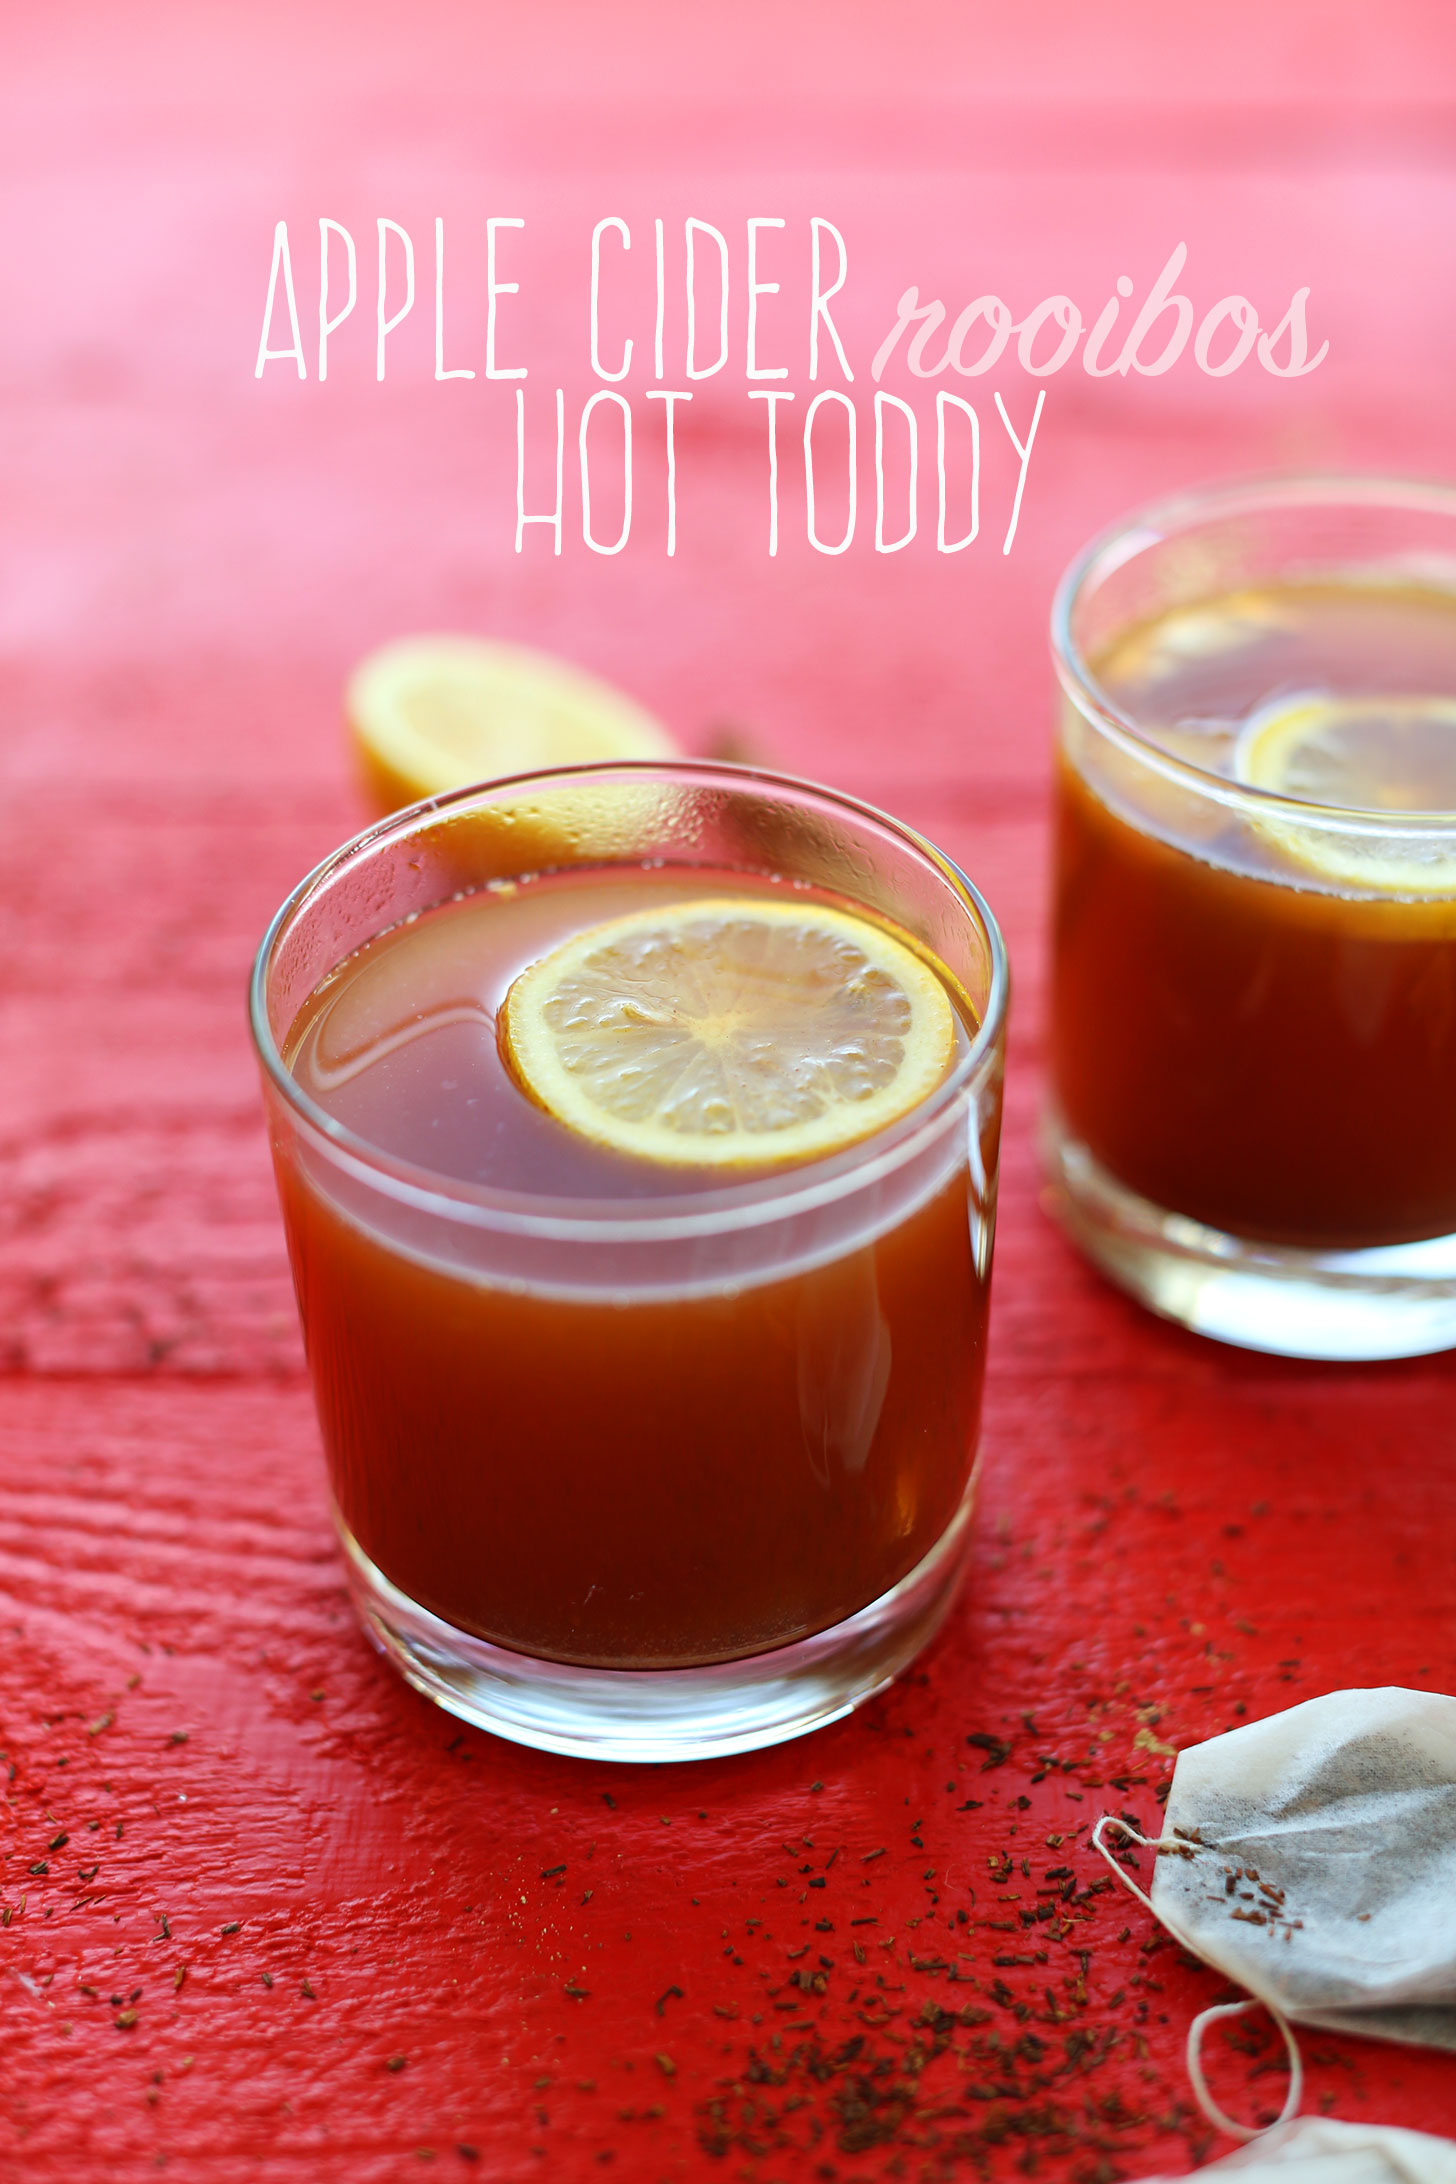 Glasses filled with our Apple Cider Rooibos Hot Toddy recipe and sliced lemons